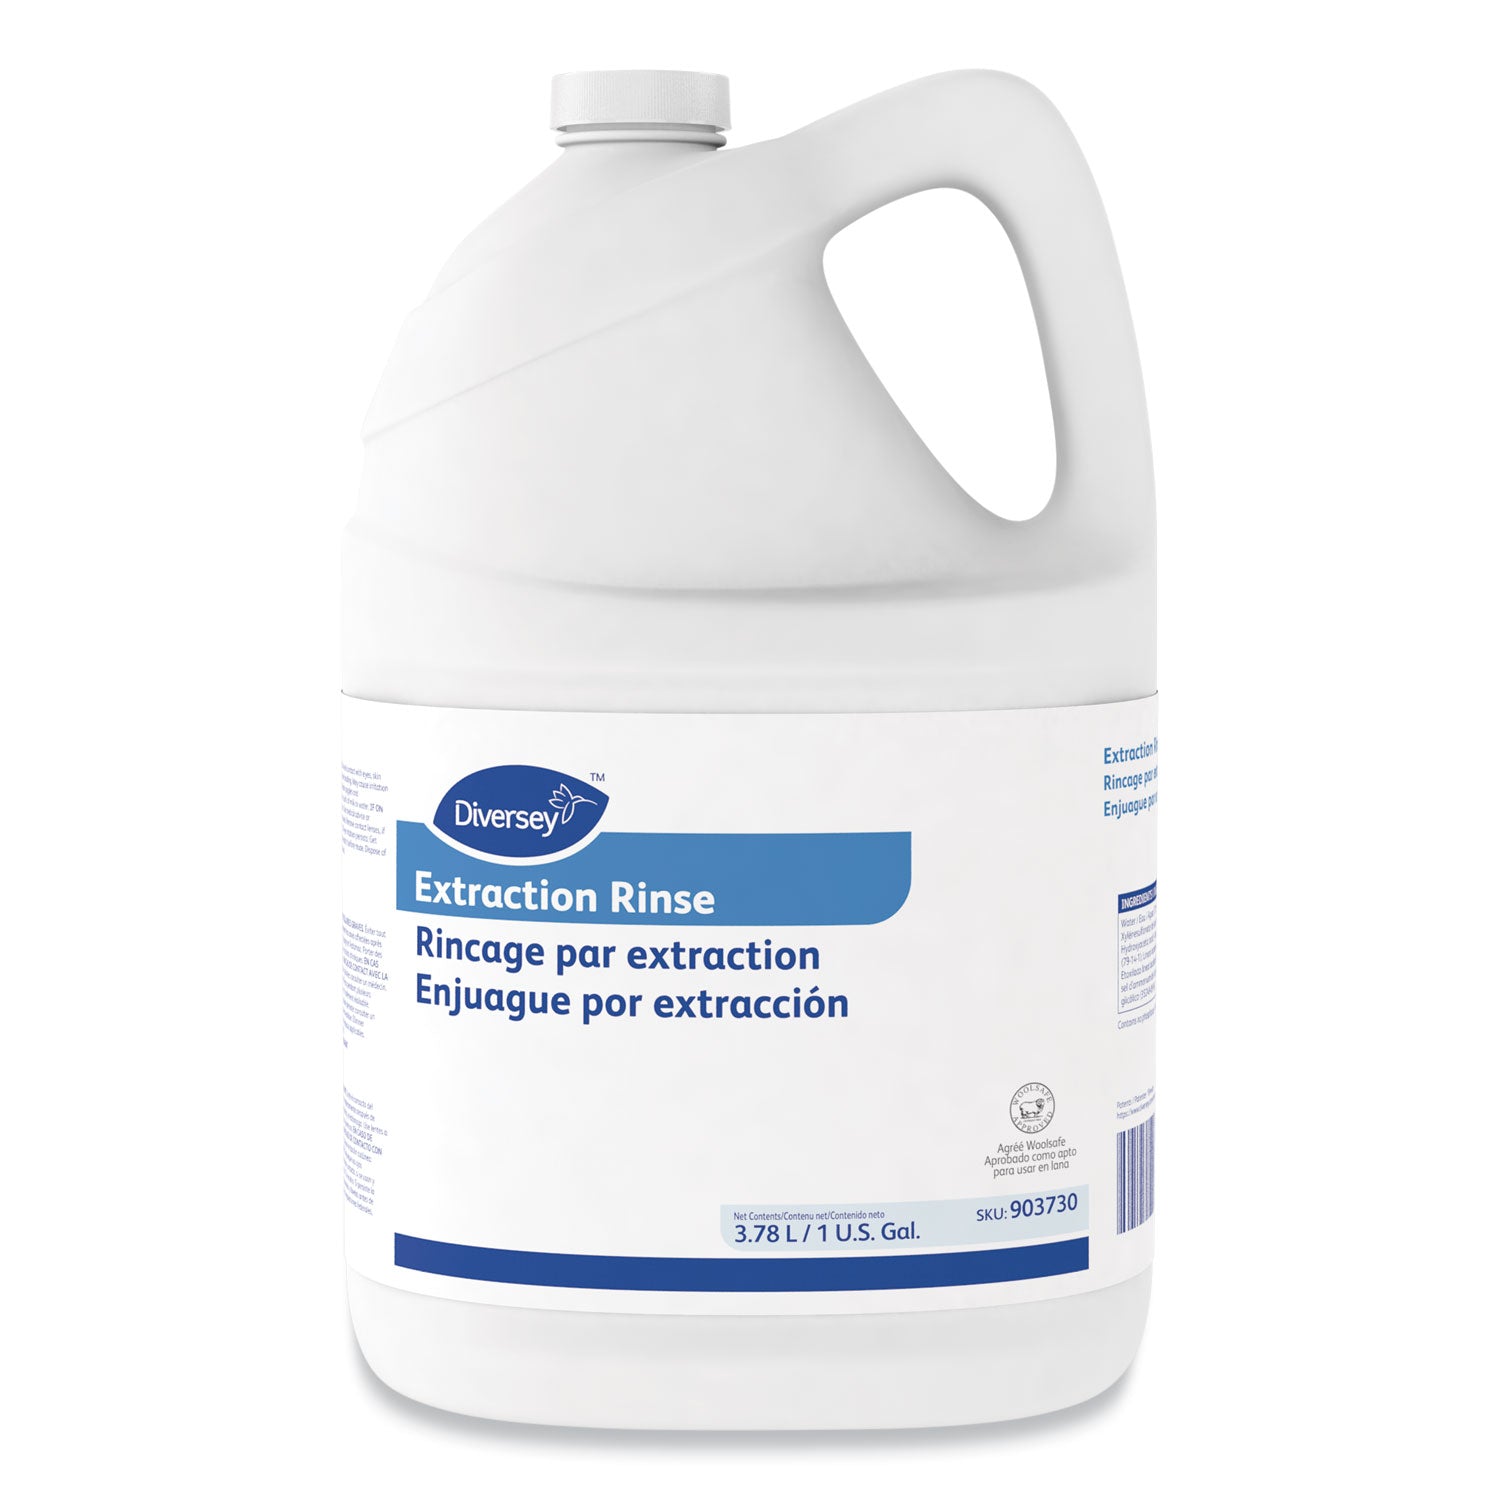 carpet-extraction-rinse-floral-scent-1-gal-bottle-4-carton_dvo101109760 - 1